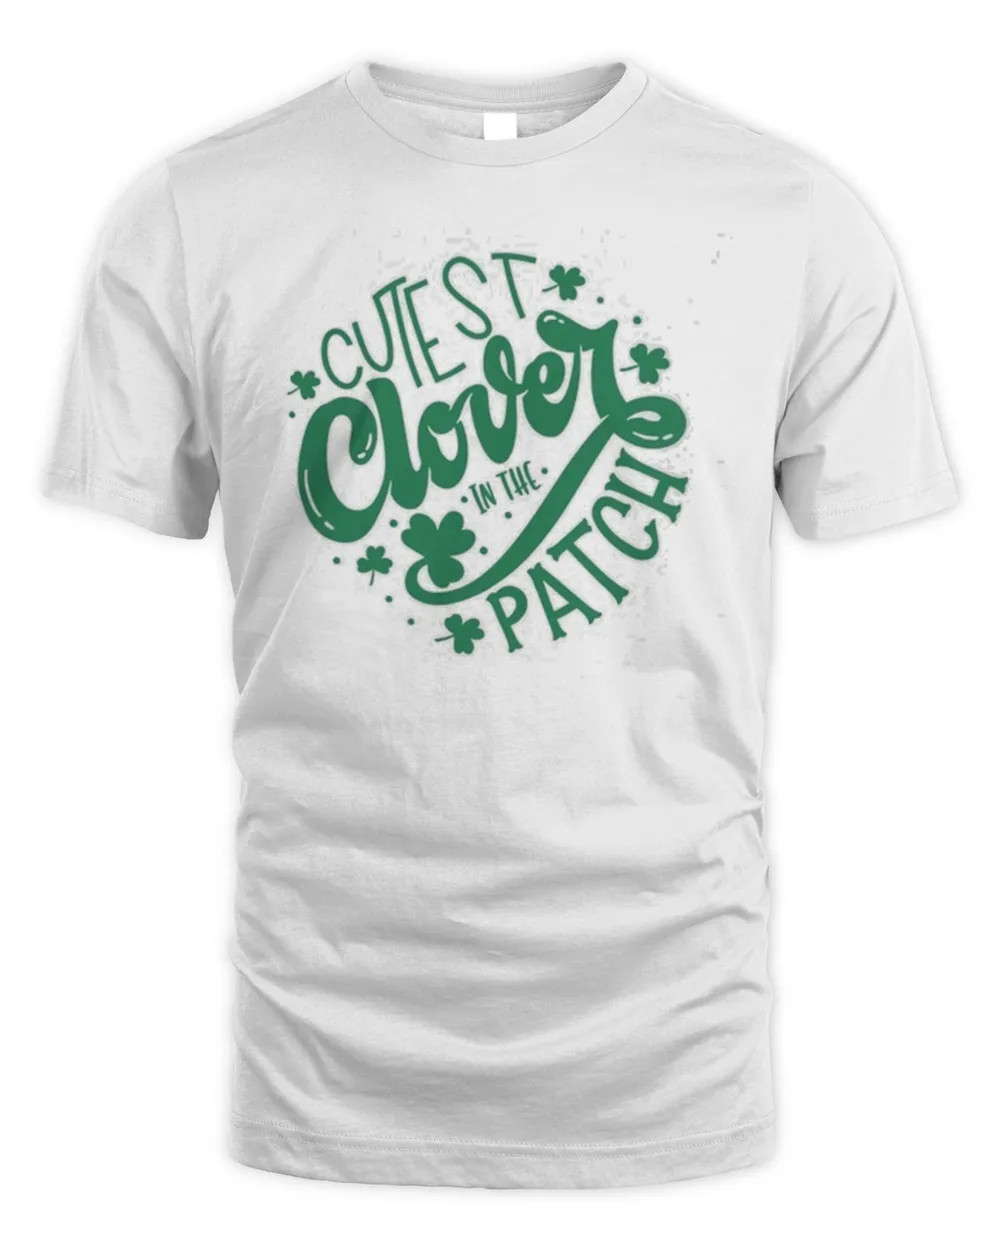 Cutest Clover In The Patch Shirt, Kids St. Patrick's Day Shirt